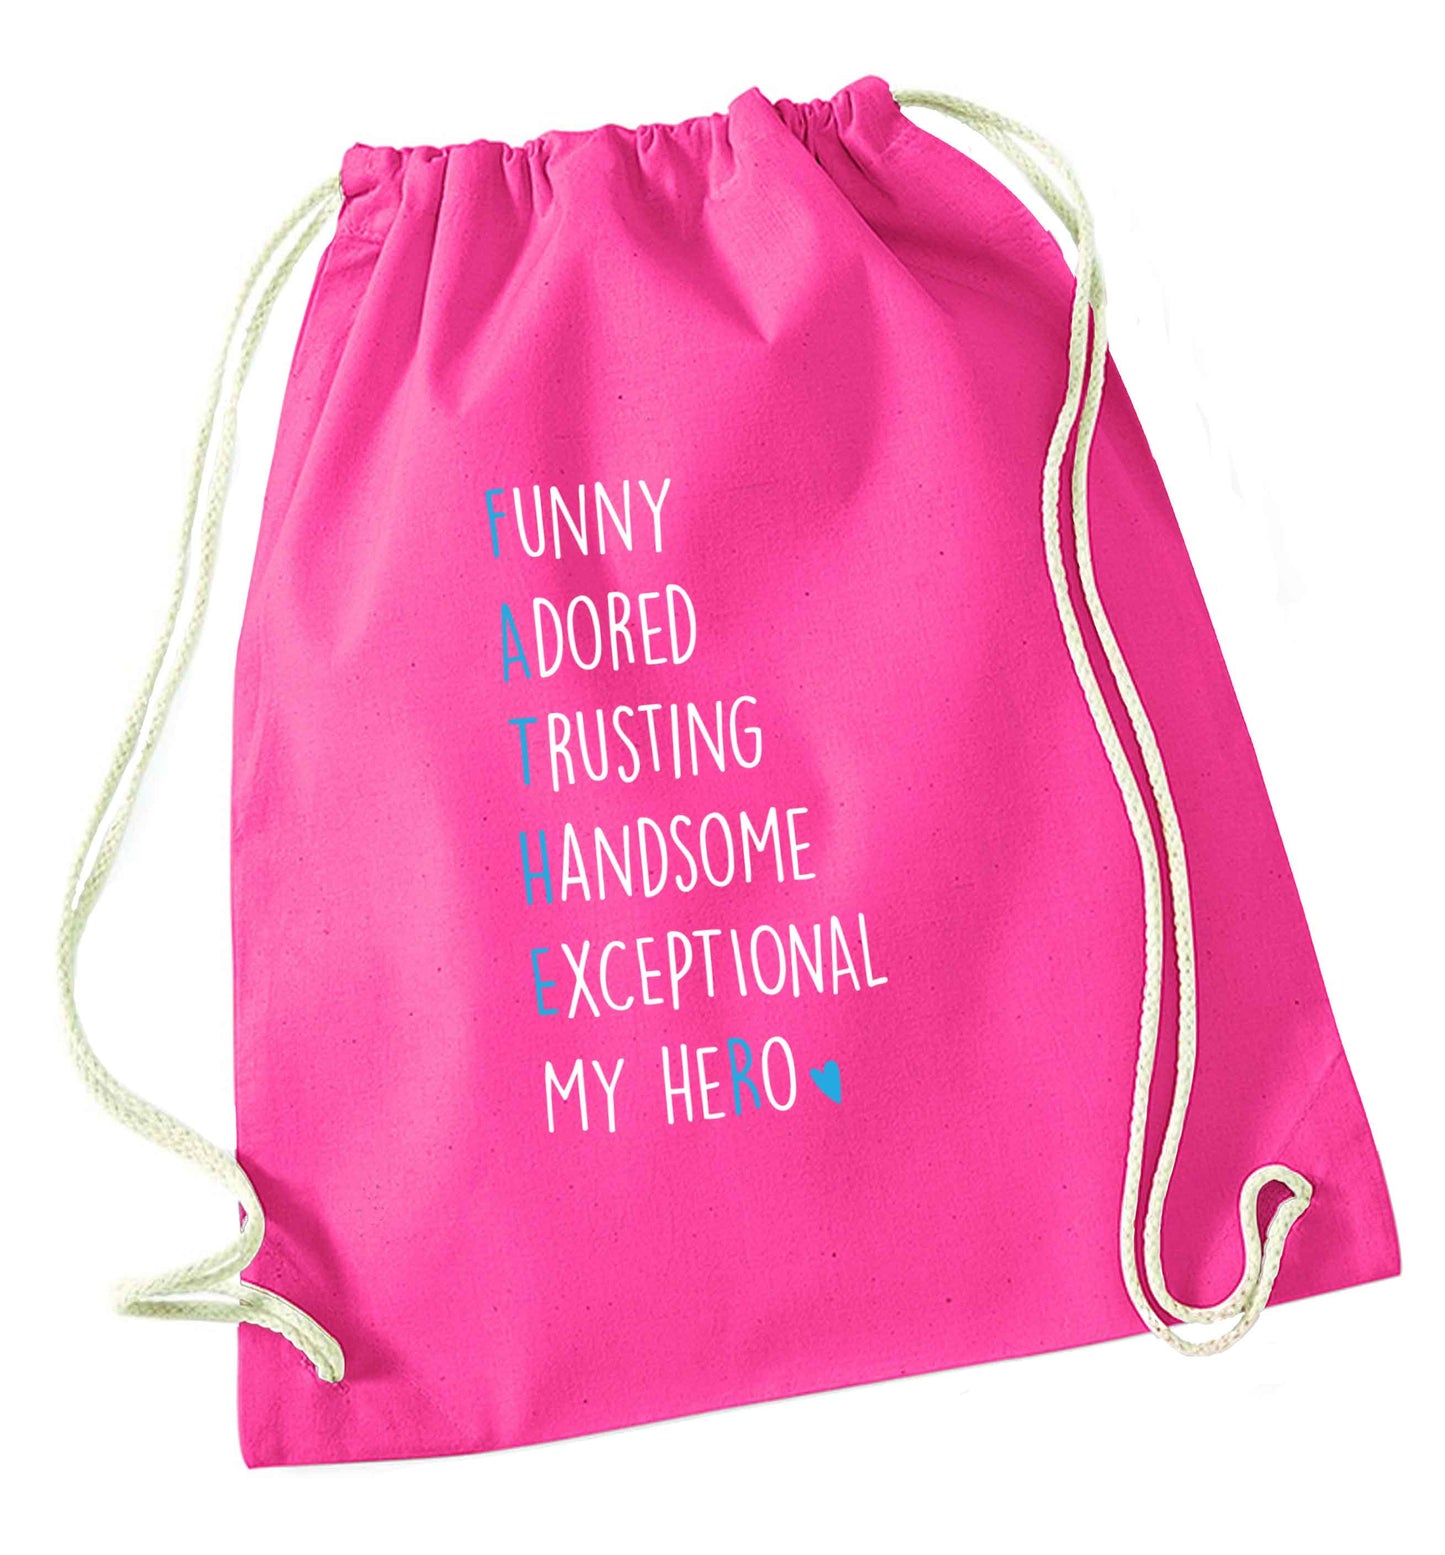 Father meaning hero acrostic poem pink drawstring bag